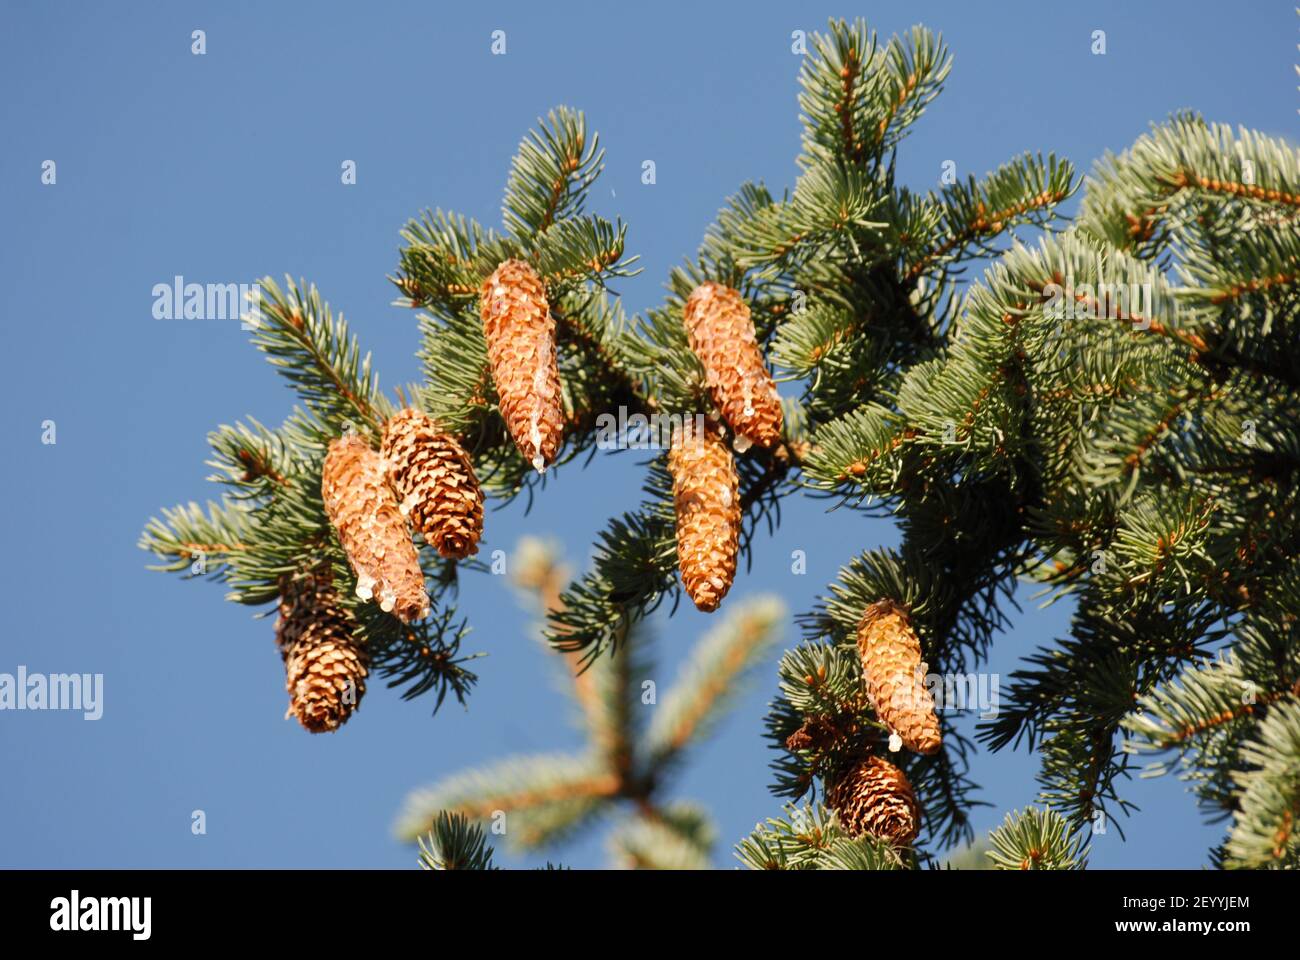 Picea punges, picea abies, pinaceae, cones of the spruce, cones, spruce, Stock Photo